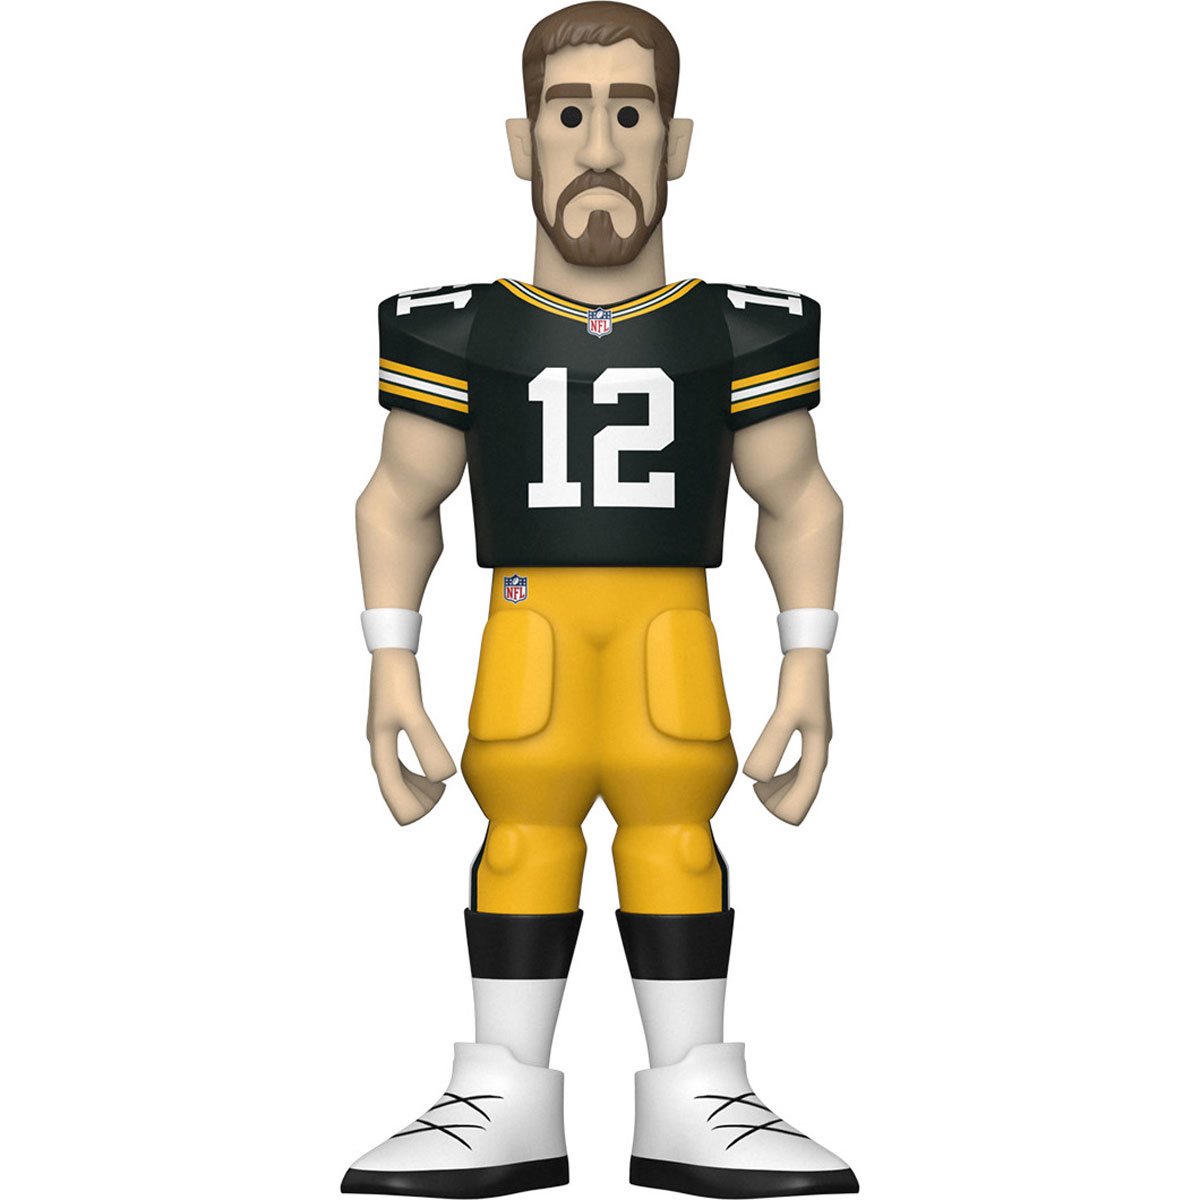 Styles May V - Funko Gol Home Uniform Packers- Aaron Rodgers 2021, Toy NUEVO